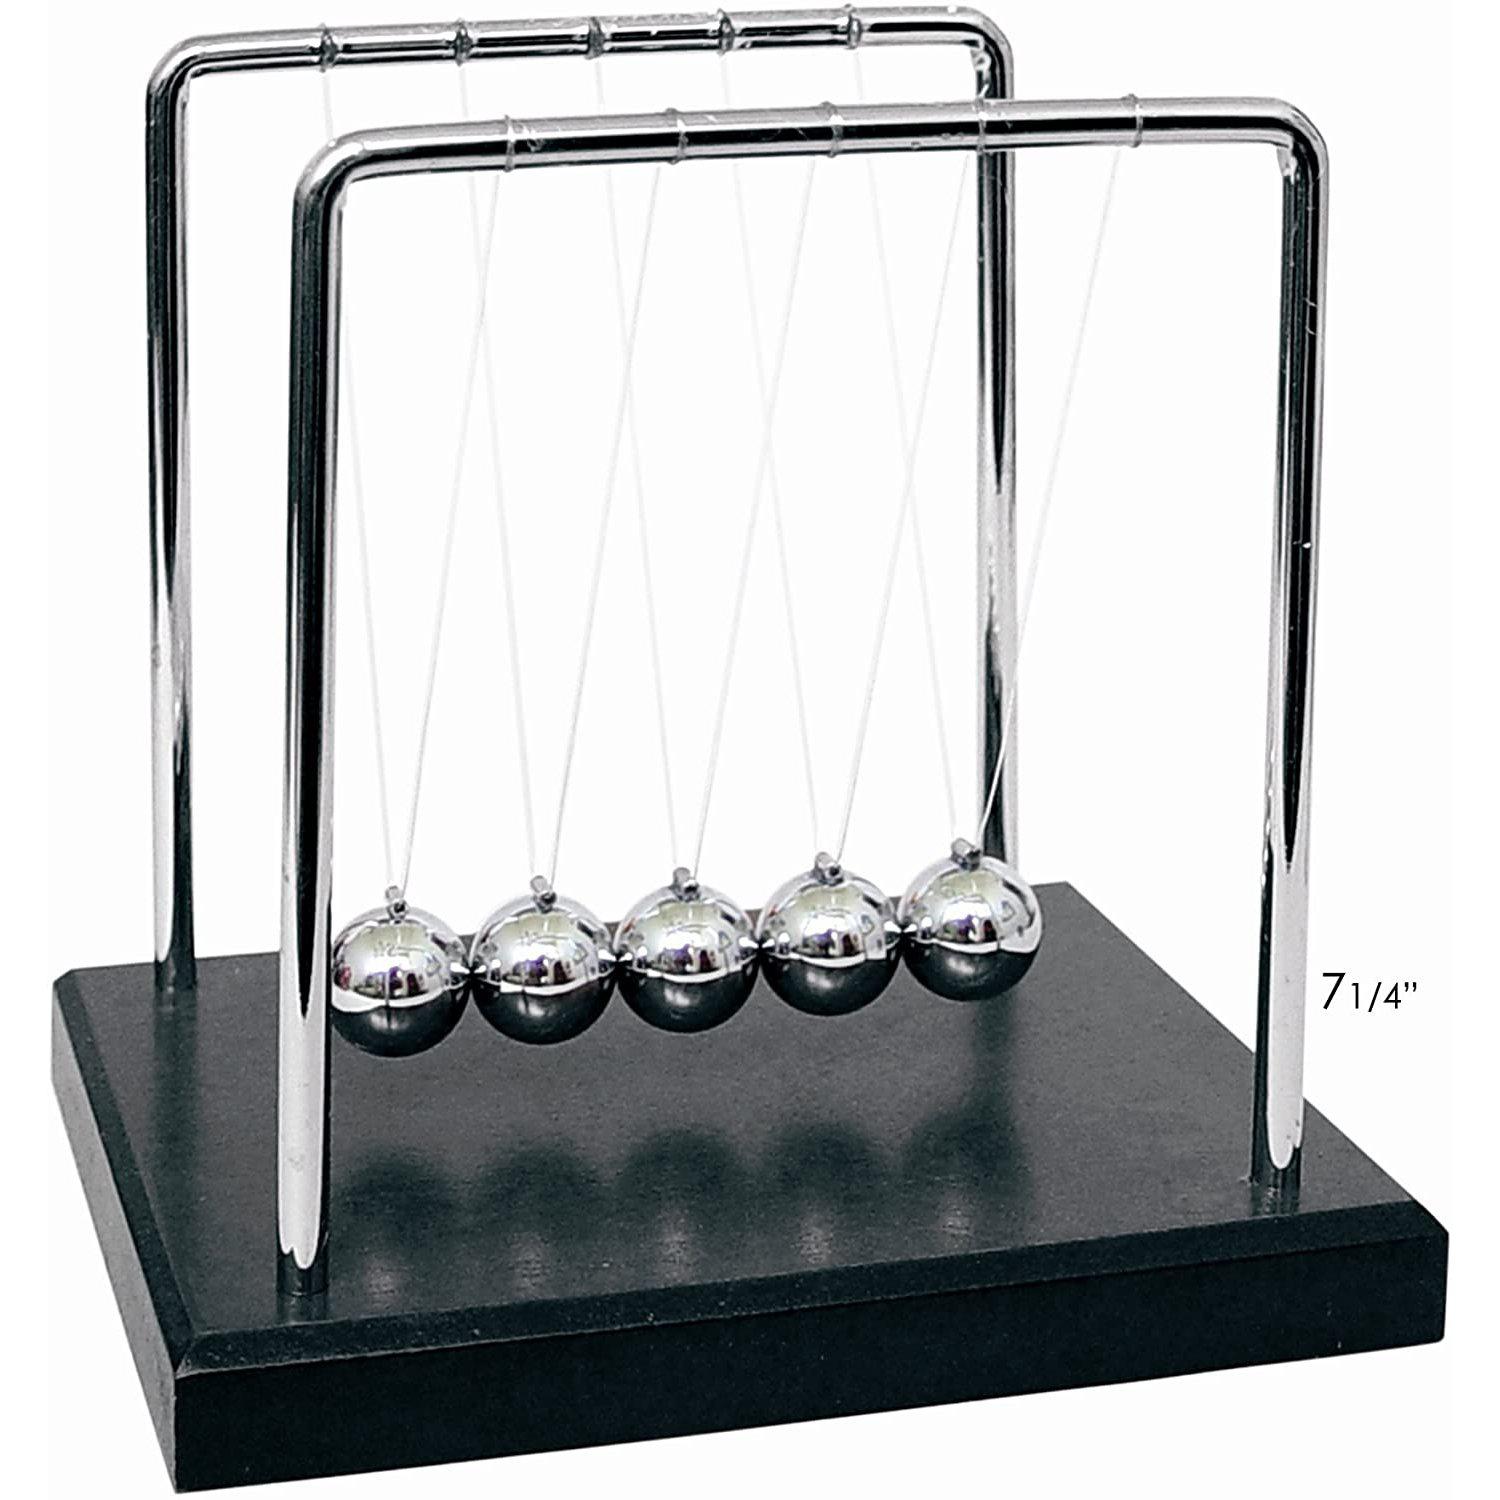 Front view of Newton's Cradle out of packaging.